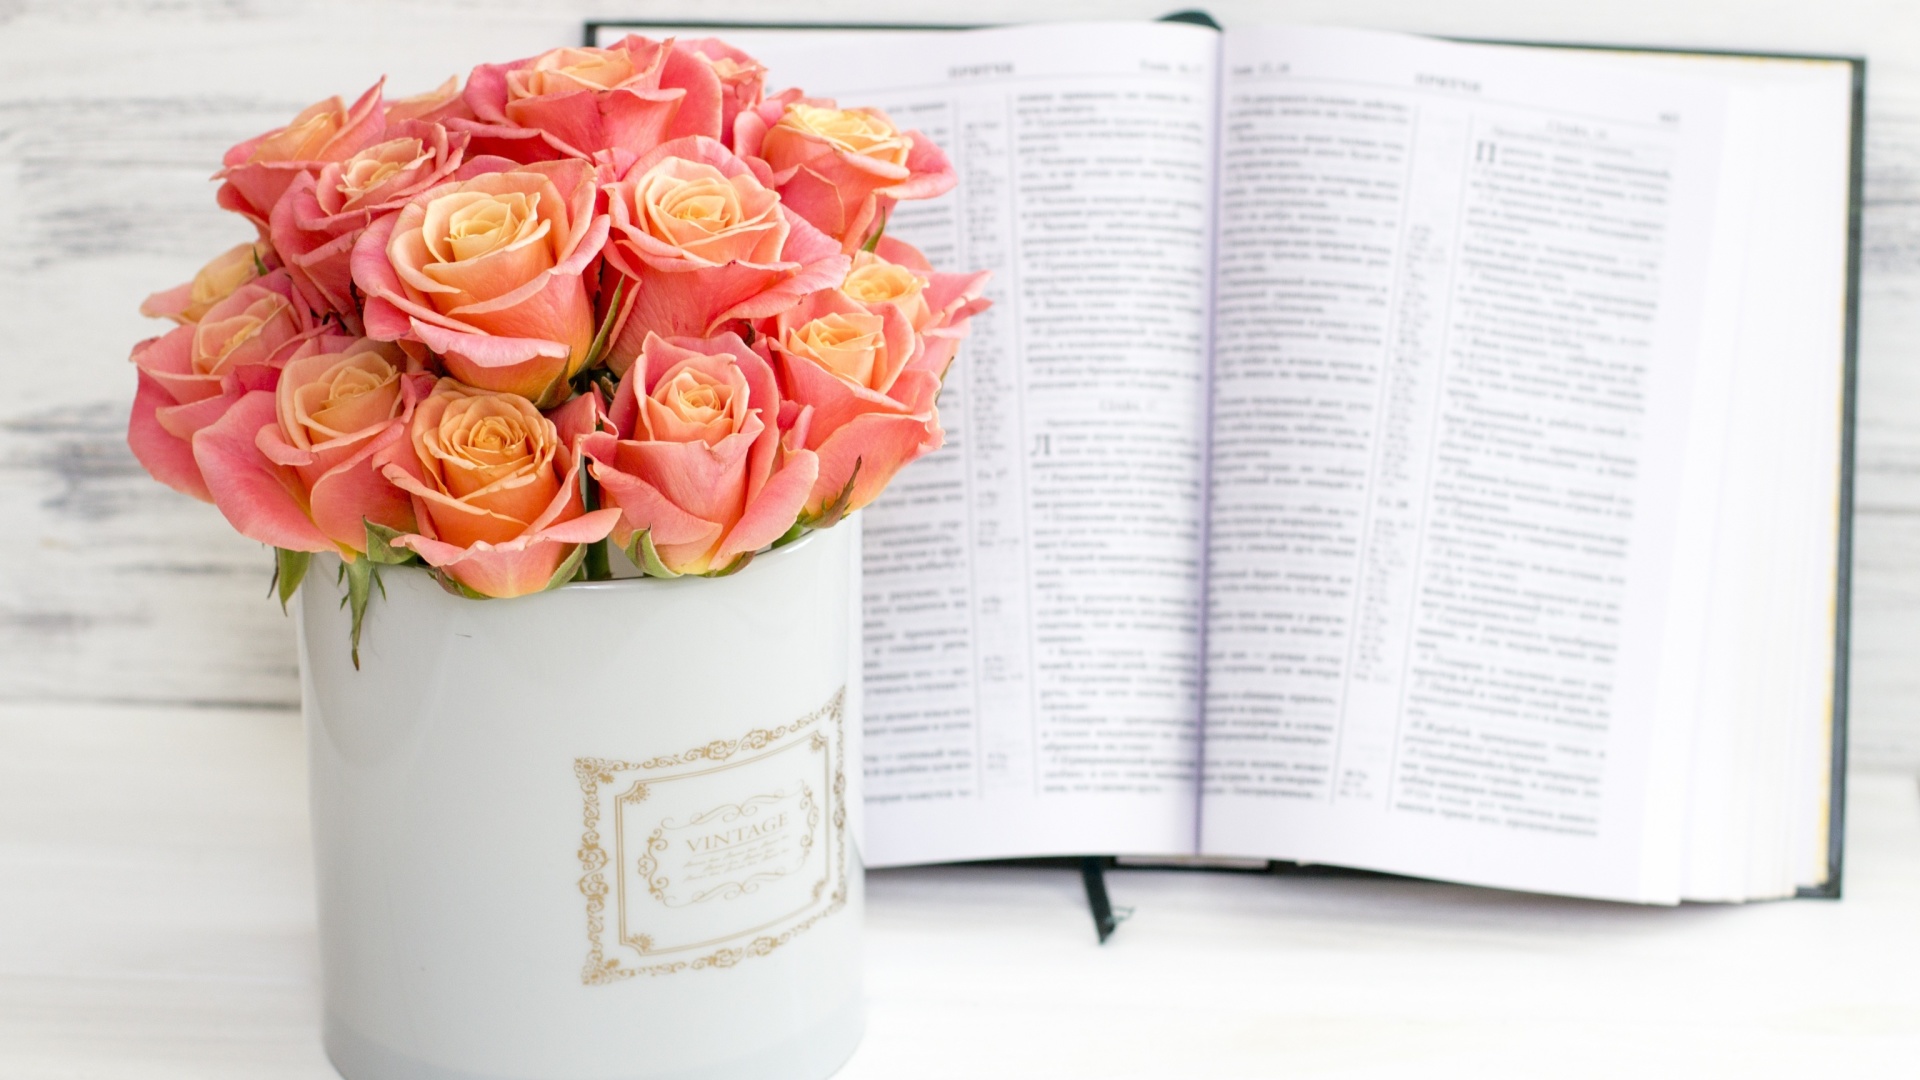 Roses and Book wallpaper 1920x1080